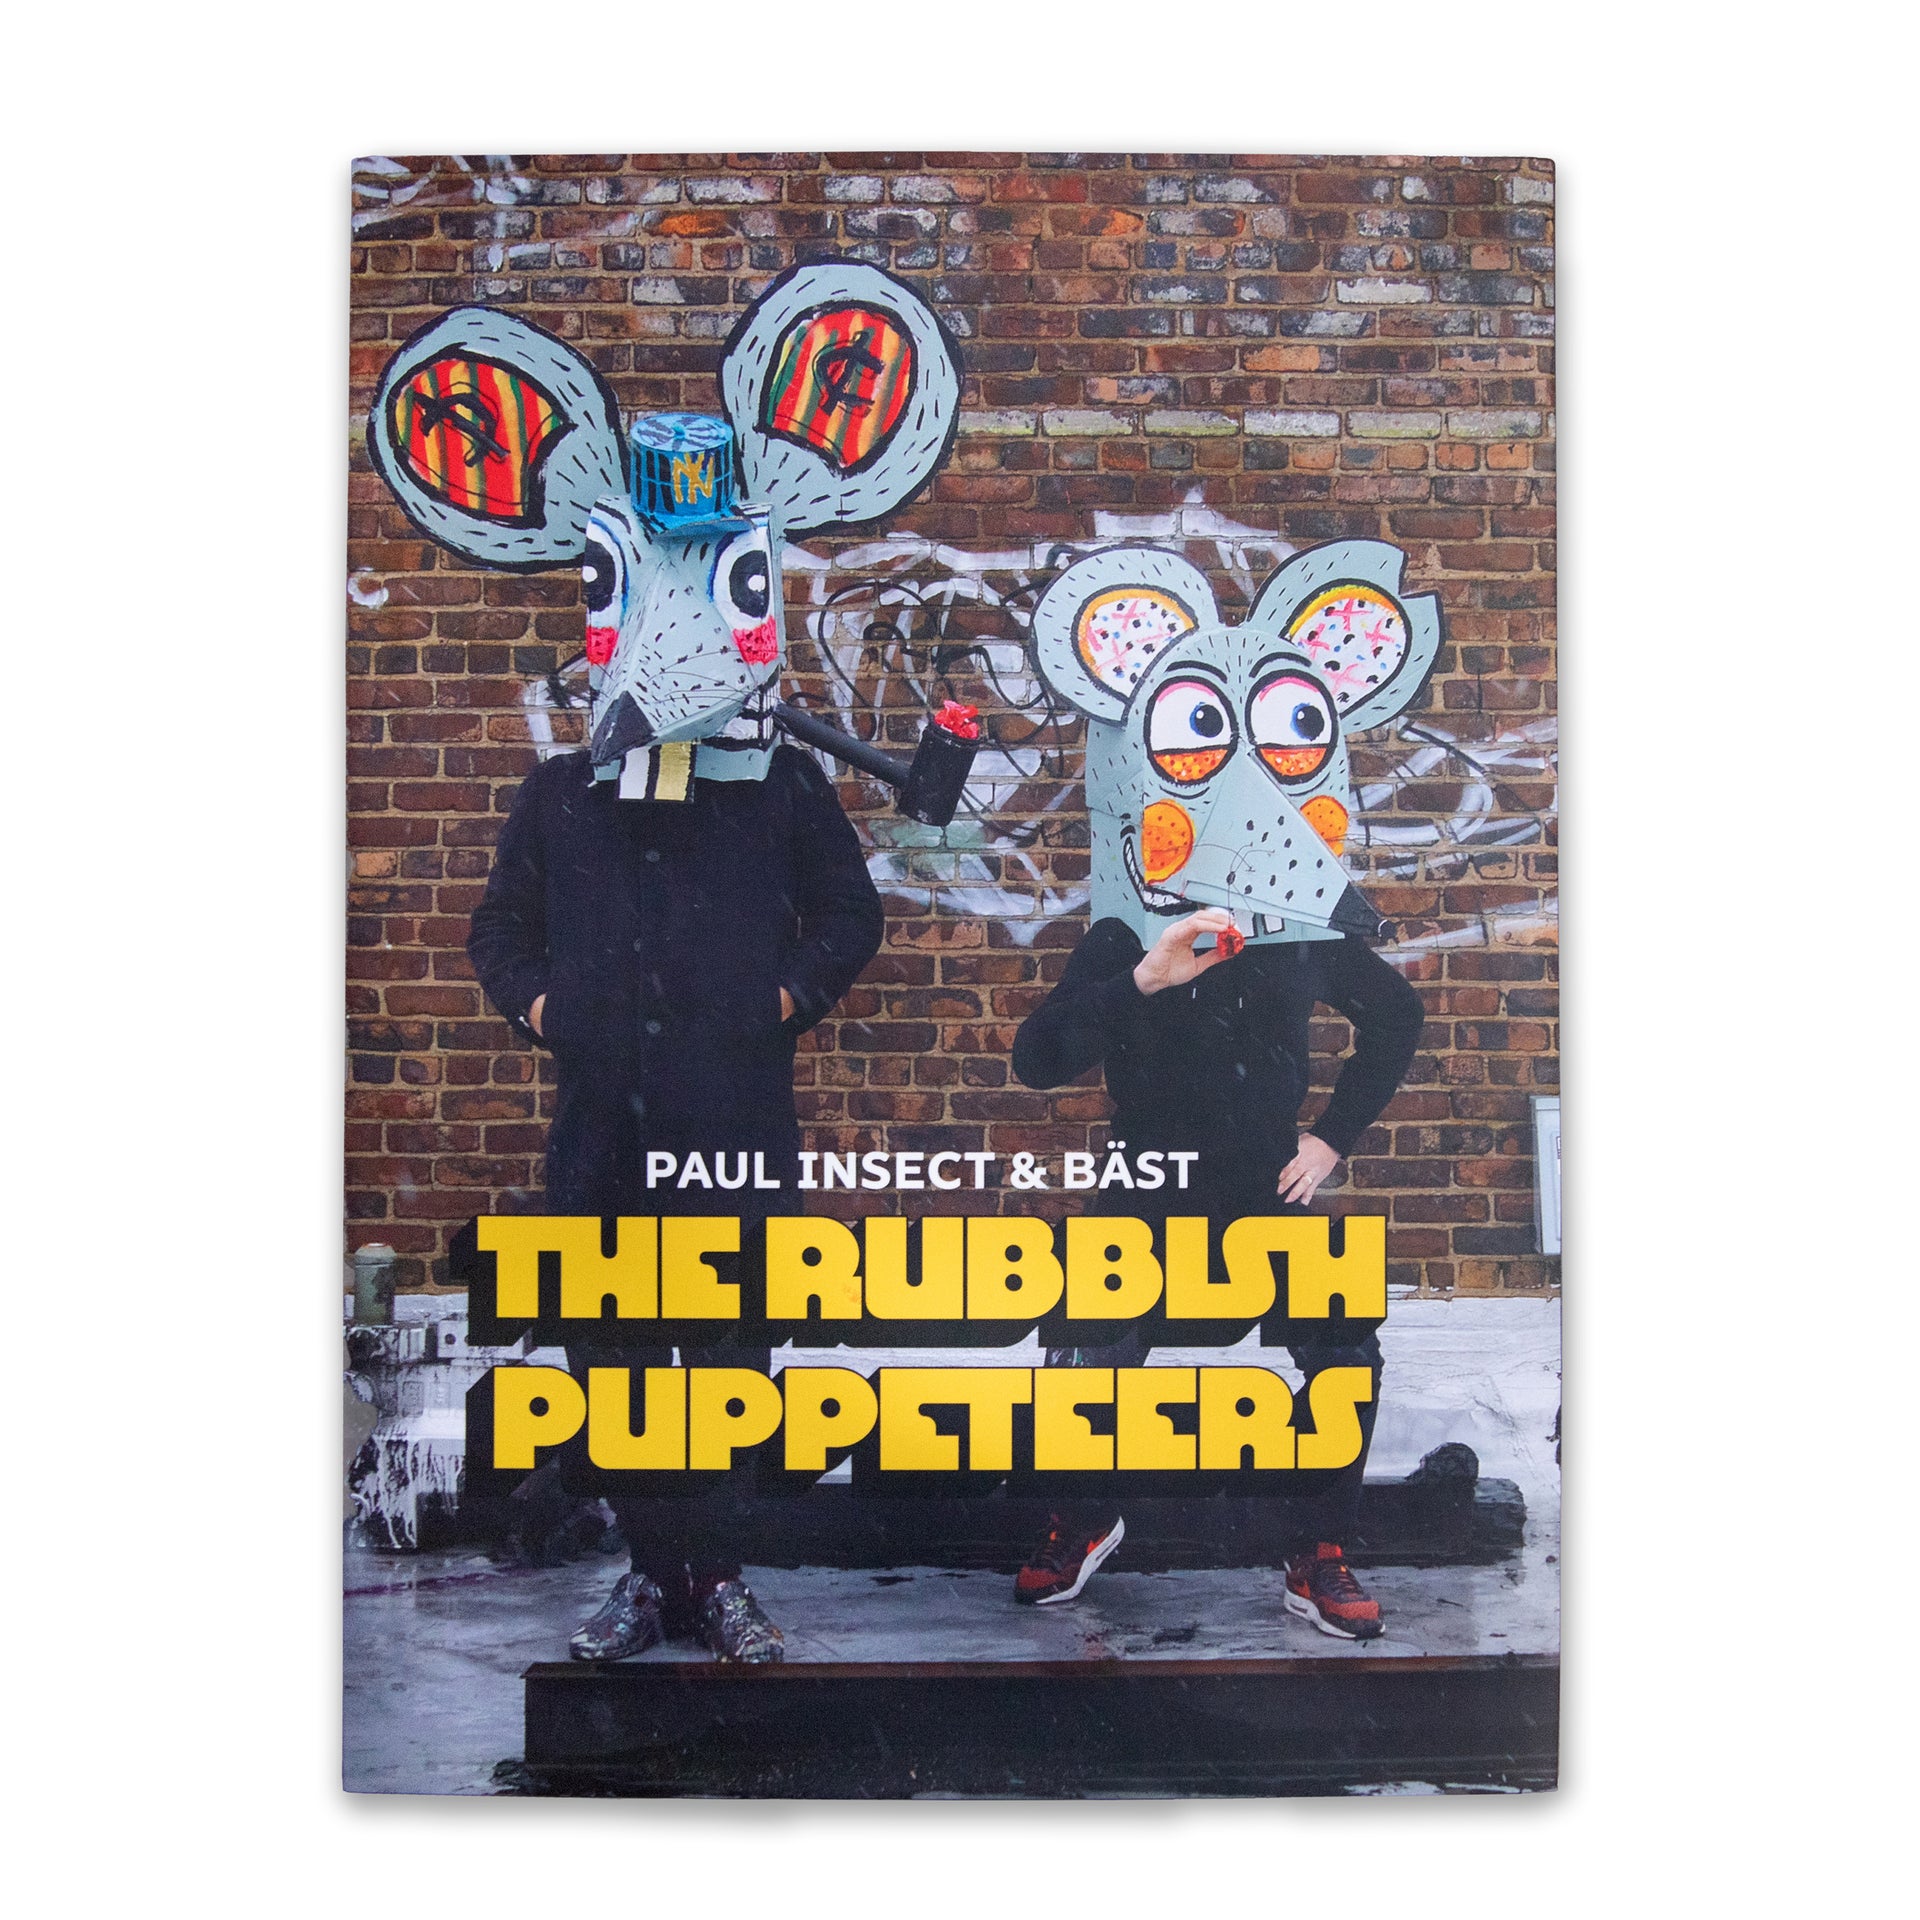 Paul Insect & BAST "The Rubbish Puppeteers" Book